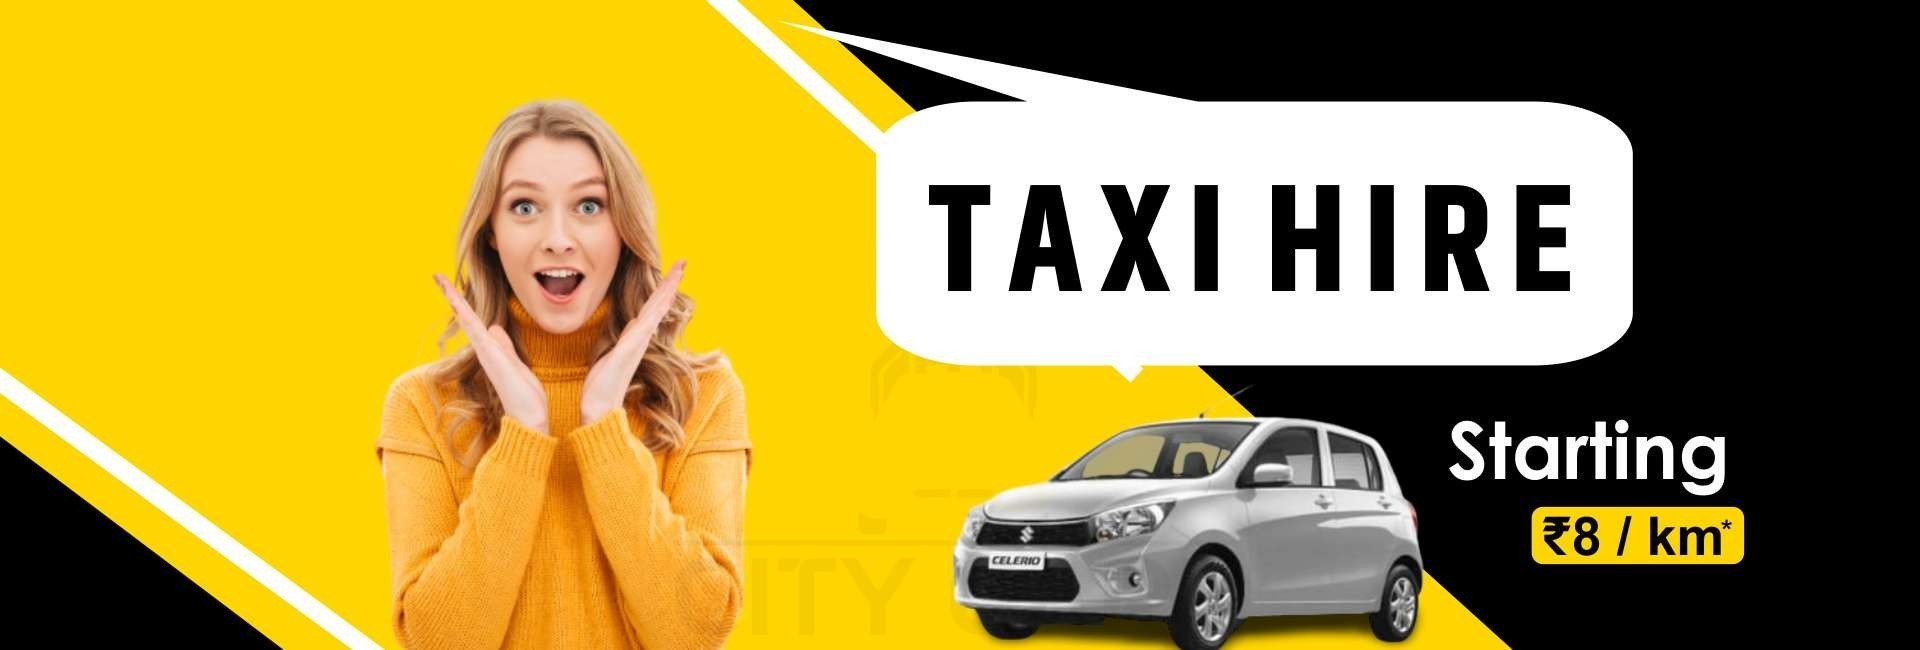 Taxi Service in Ahmedabad Car Rental Service Cab Booking